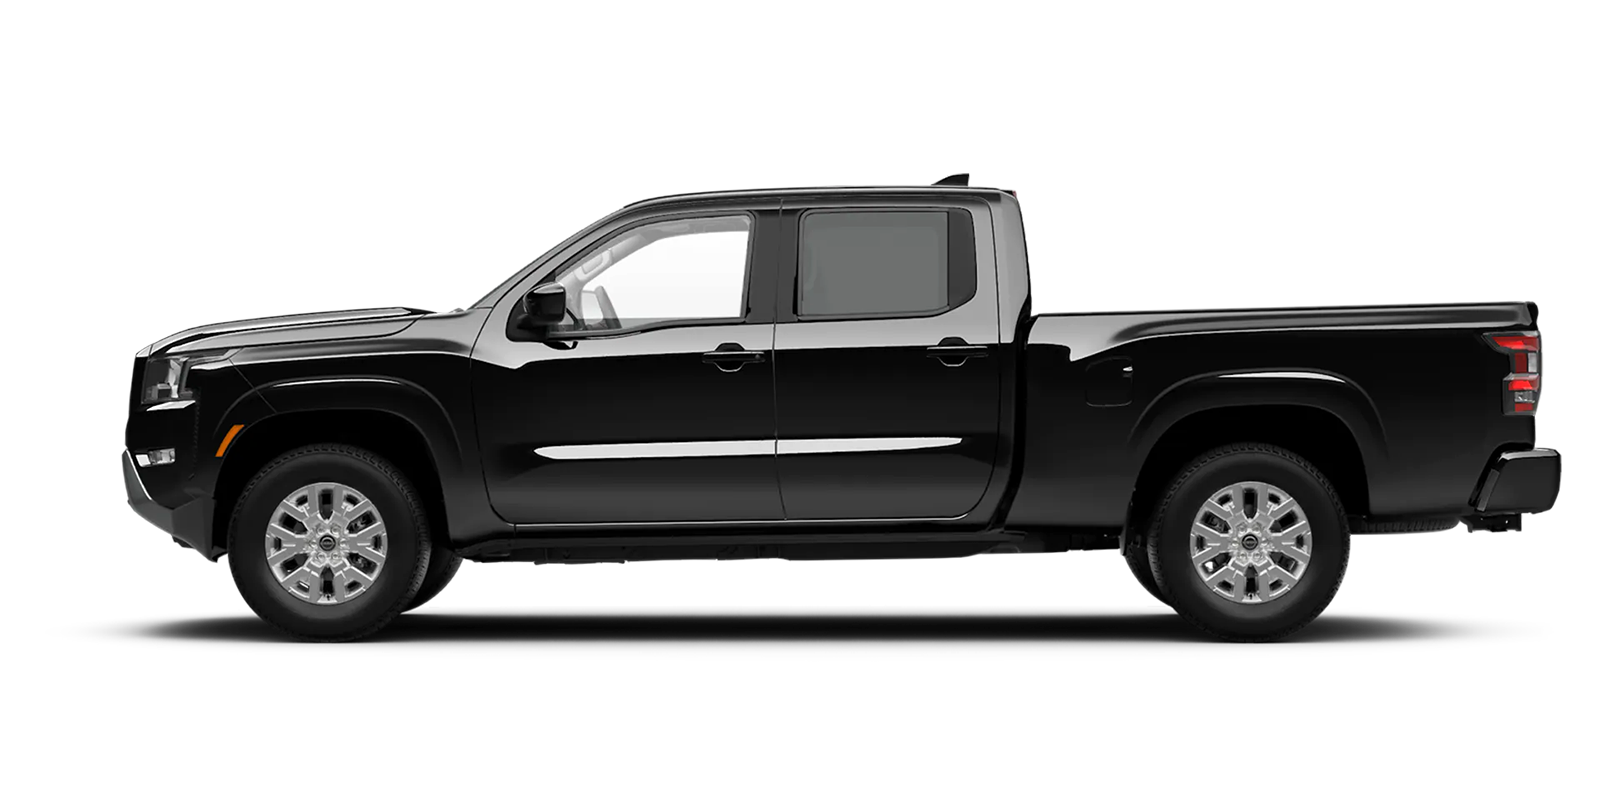 2022 Frontier Crew Cab Long Bed SV 4x2 in Super Black | Jim Click Nissan in Tucson AZ